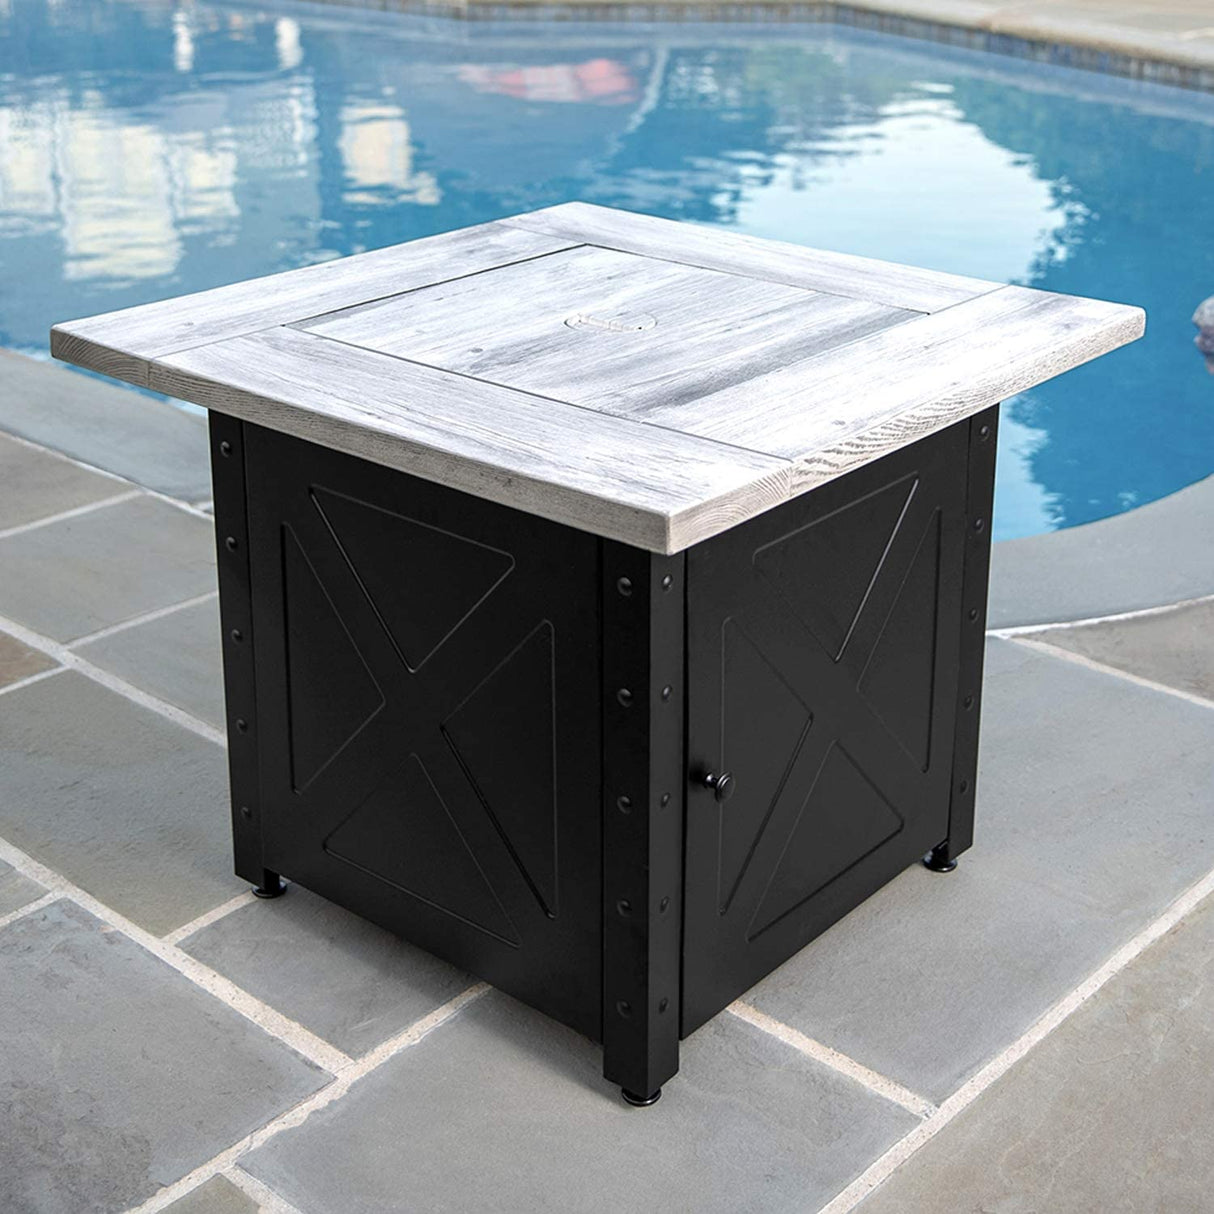 Endless Summer Mason Propane Gas Outdoor Fire Pit Table with Fire Glass